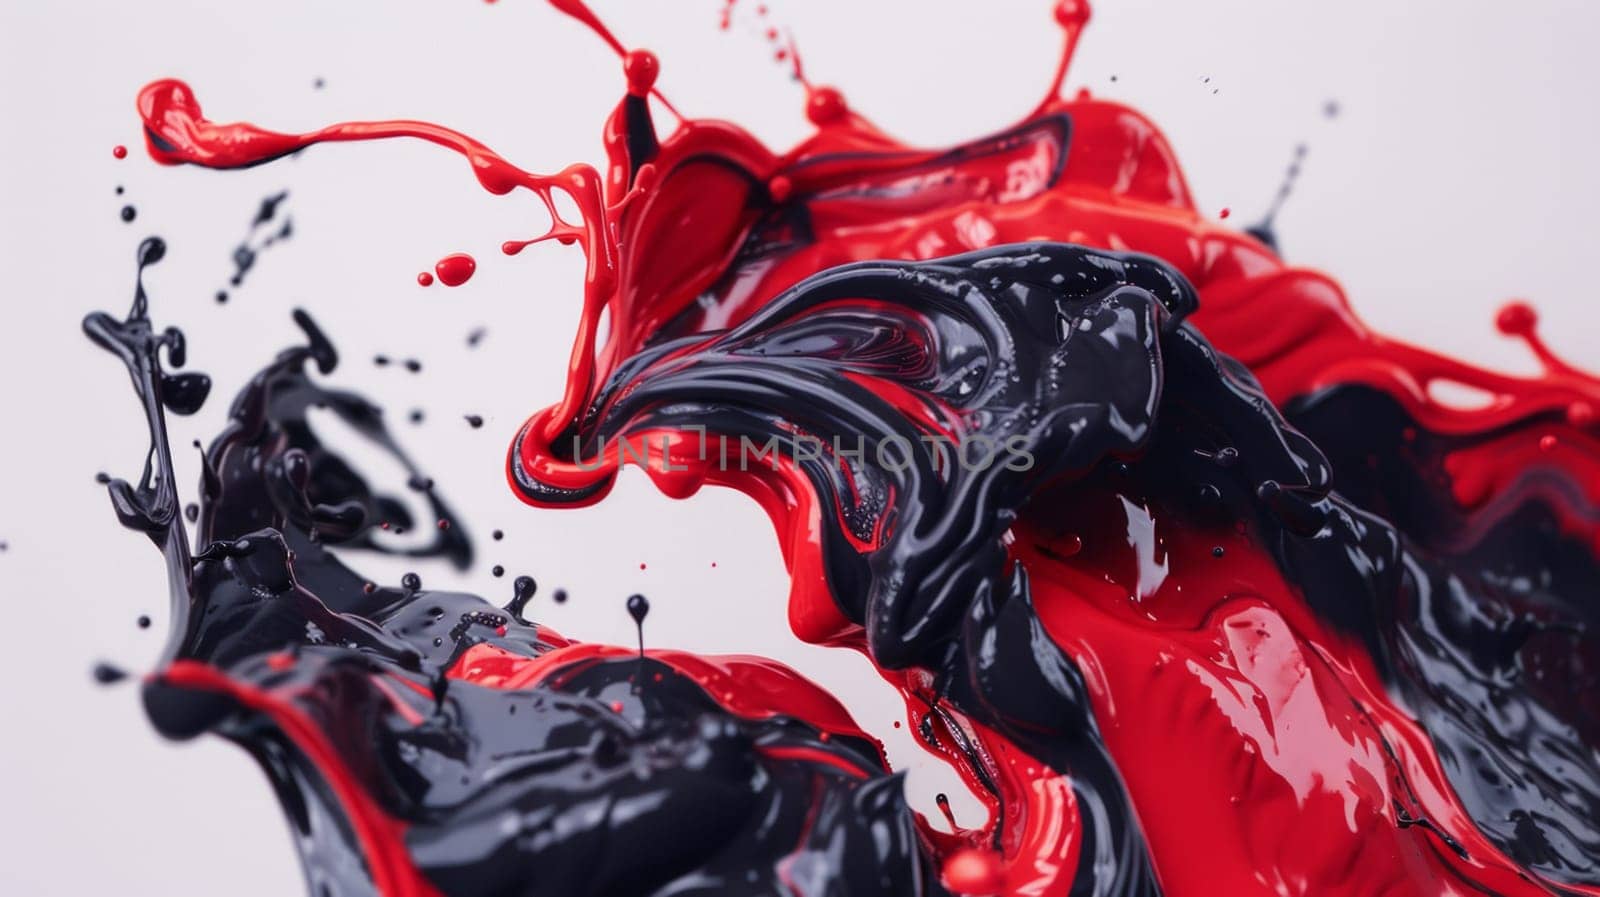 A dynamic collision between red and black liquids, with both splashing and merging in a mesmerizing display of color and movement.